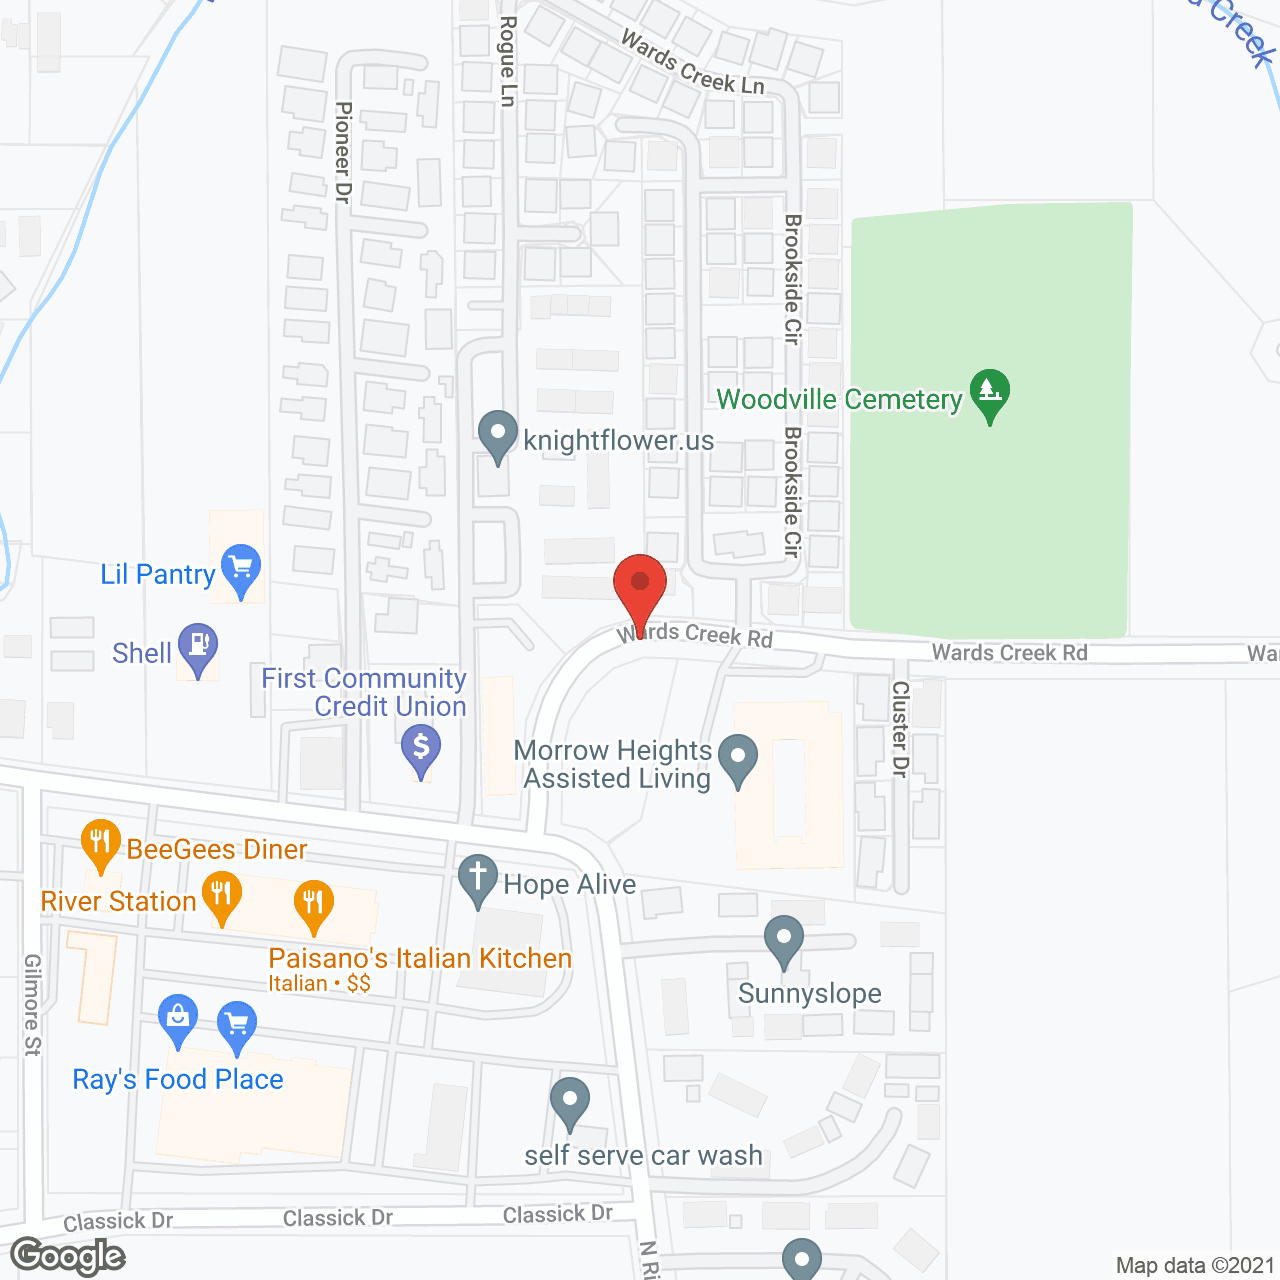 Morrow Heights Assisted Living in google map